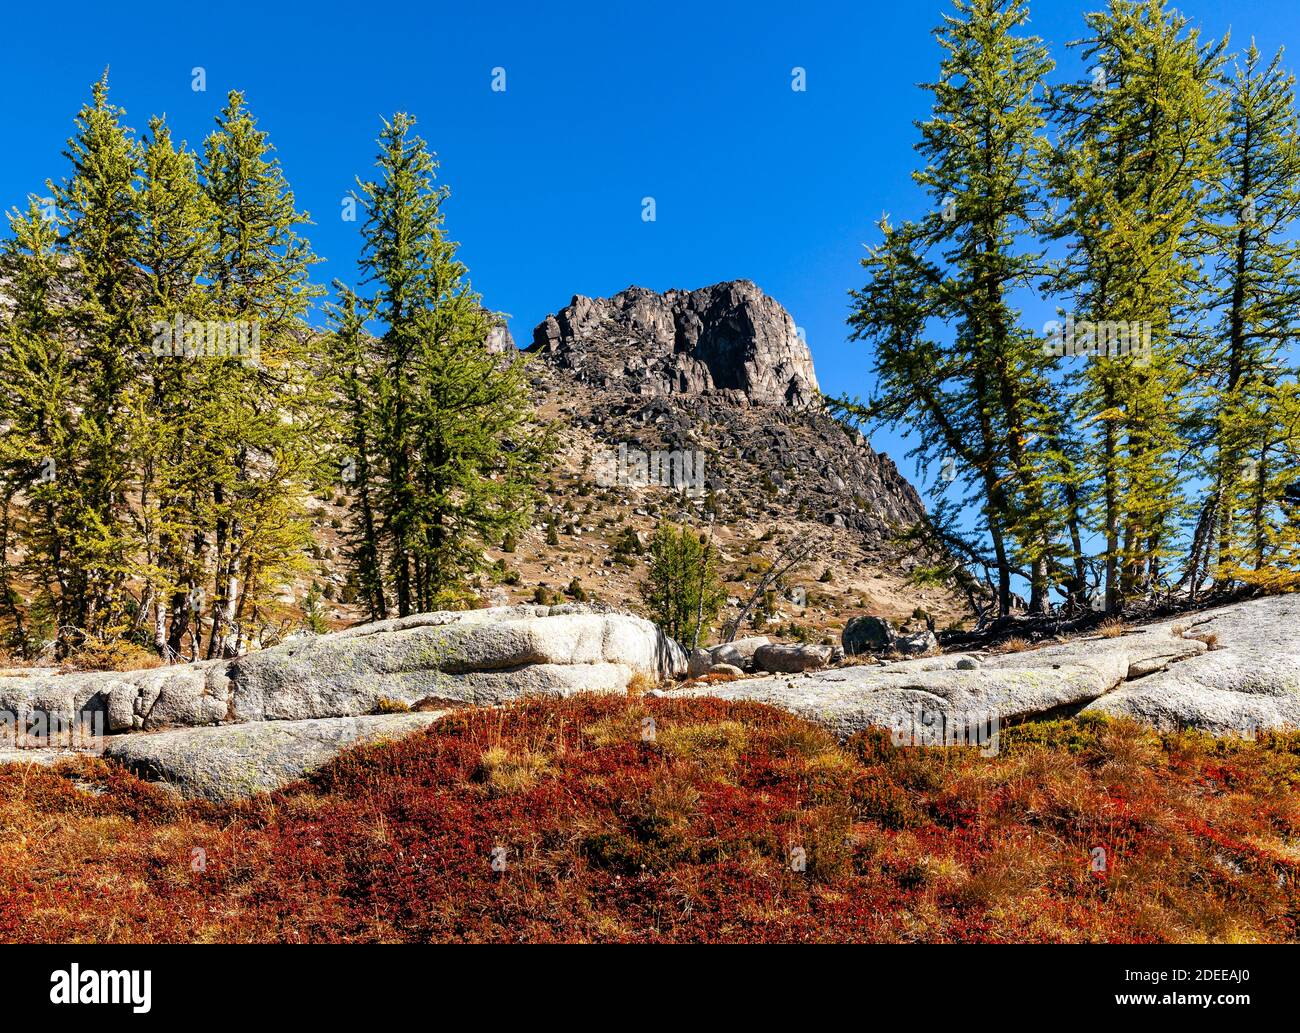 WA17691-00.....WASHINGTON -Larch trees and Cathedral Peak viewed from Upper Cathedral Lake area along the Boundary Trail #533 in the Pasayten Wilderne Stock Photo